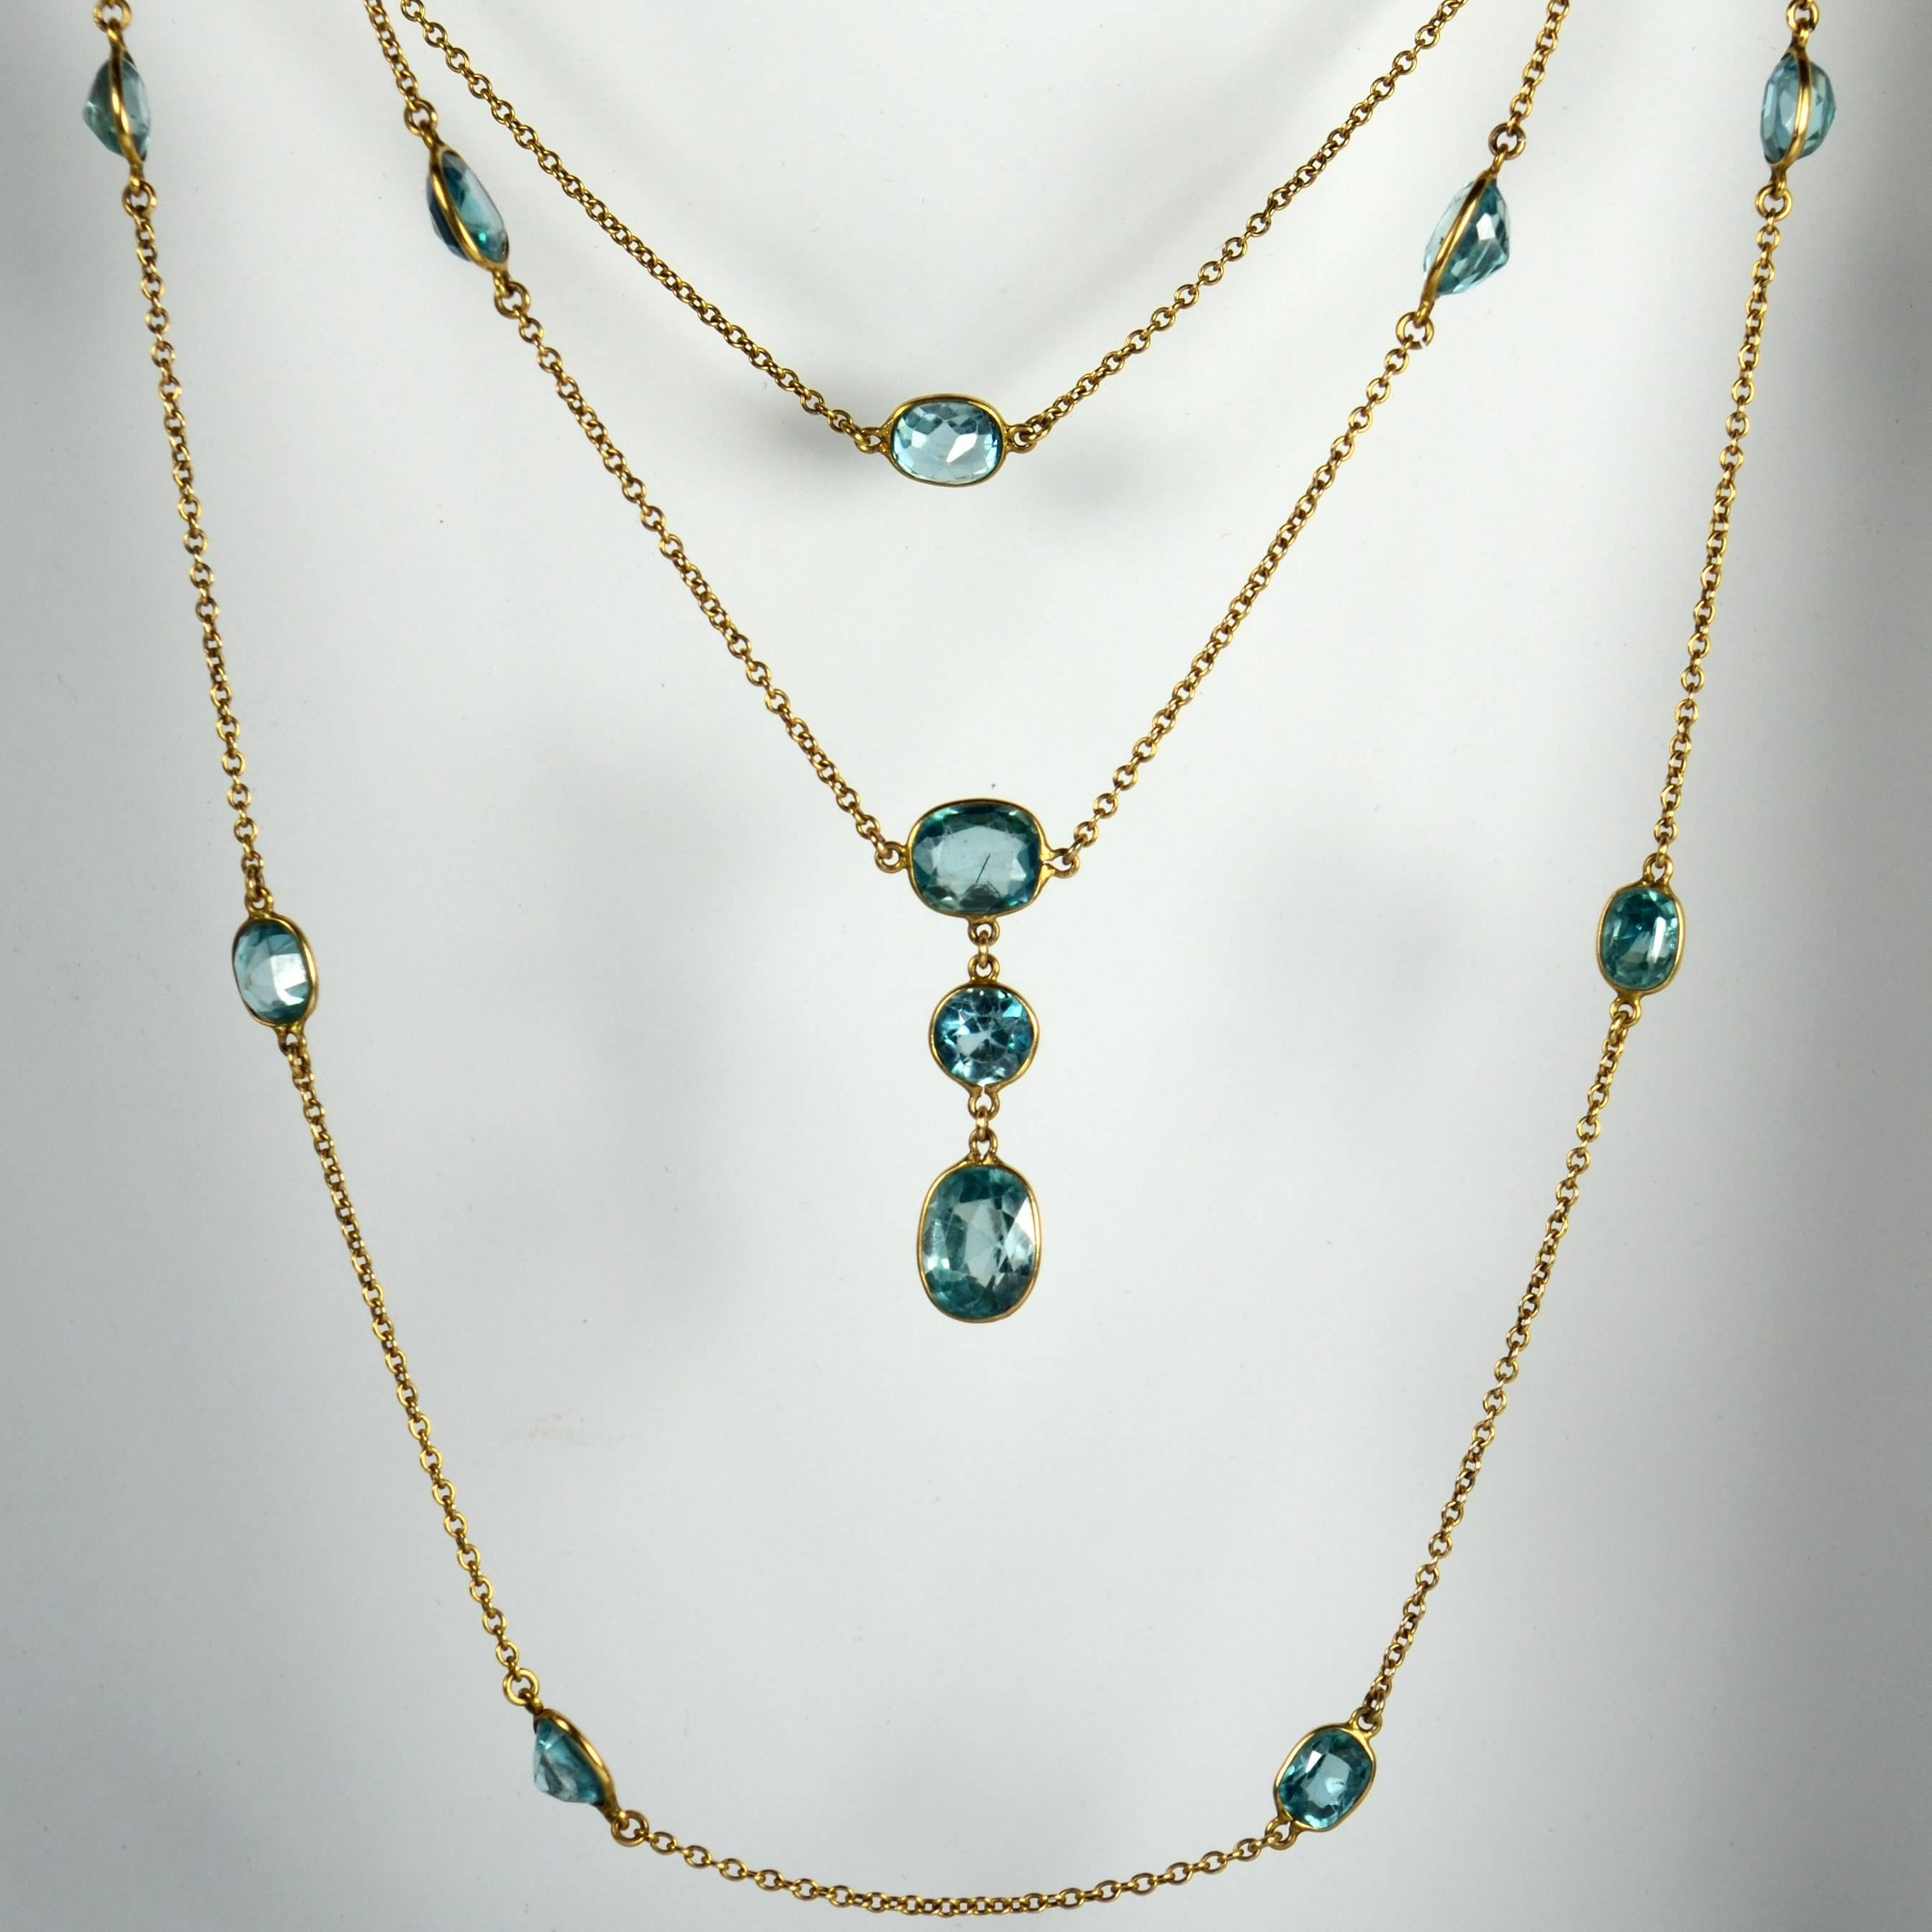 A fabulously long chain necklace in unmarked 14 carat gold set with 23 oval and round-cut blue zircons. The zircons are spectacle-set to the chain and are estimated to weigh approximately 43 carats in total.

This wonderful piece measures 108cm in